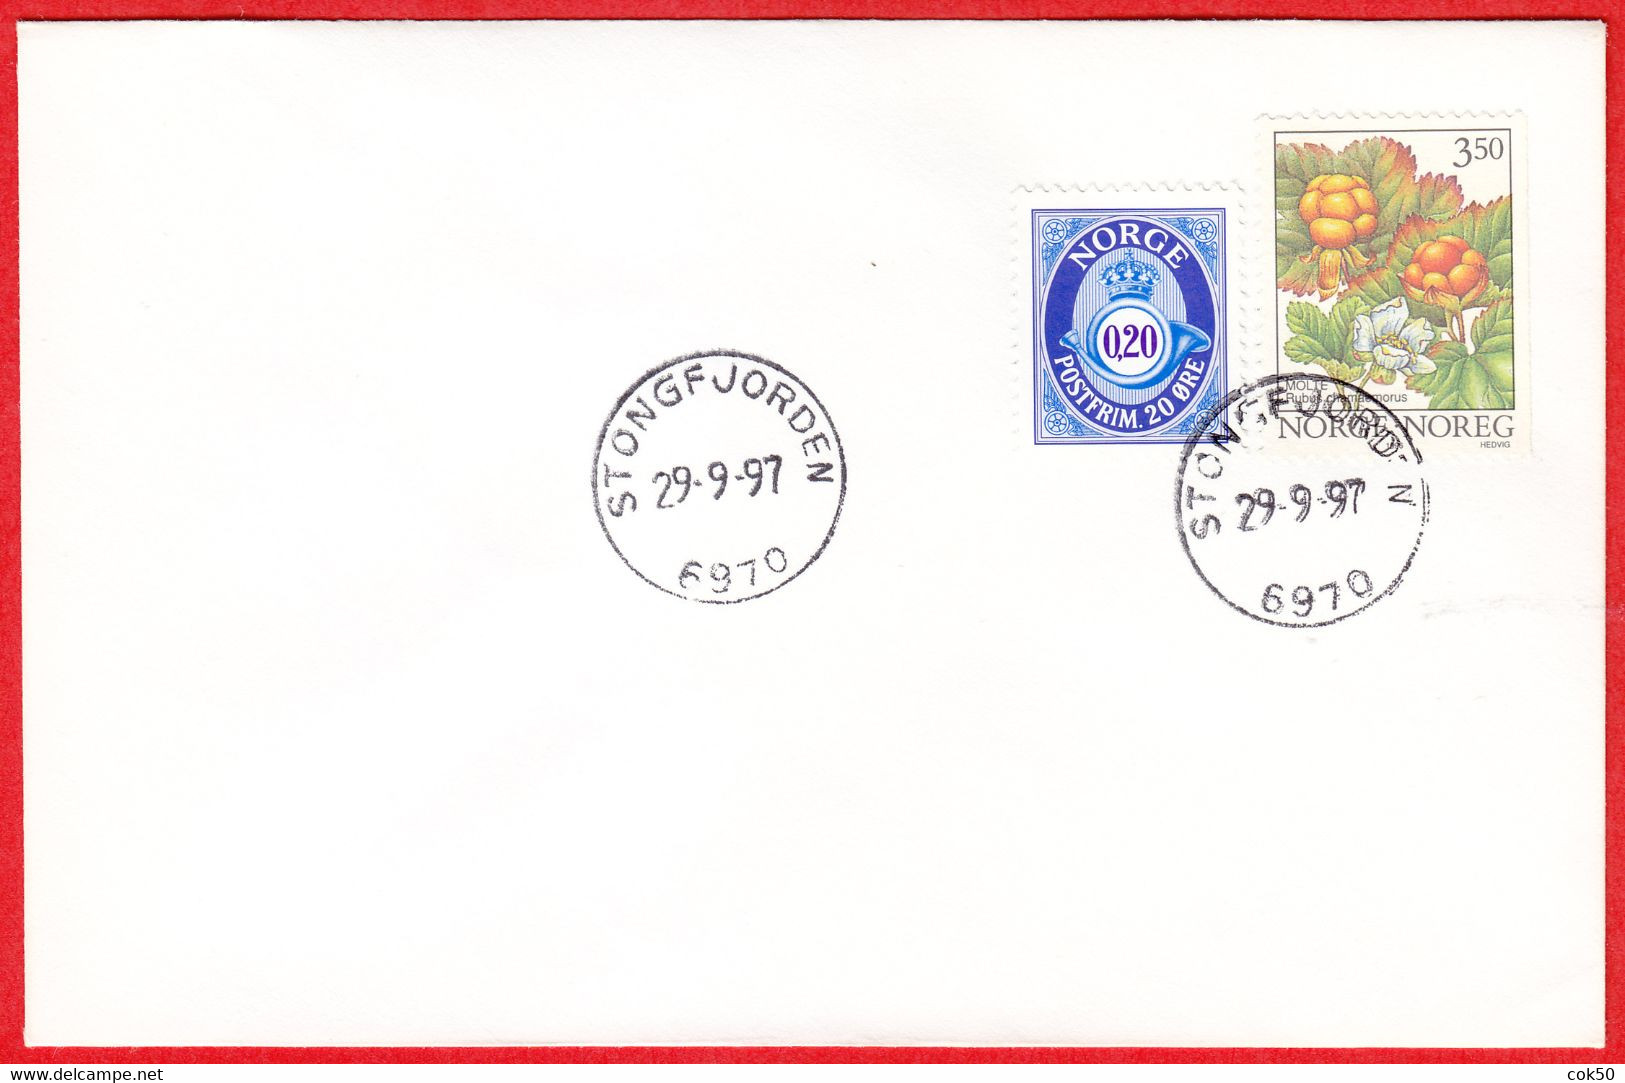 NORWAY - 6970 STONGFJORDEN (Sogn & Fj. County)  = Vestland From Jan.1 2020 - Last Day/postoffice Closed On 1997.09.29 - Local Post Stamps